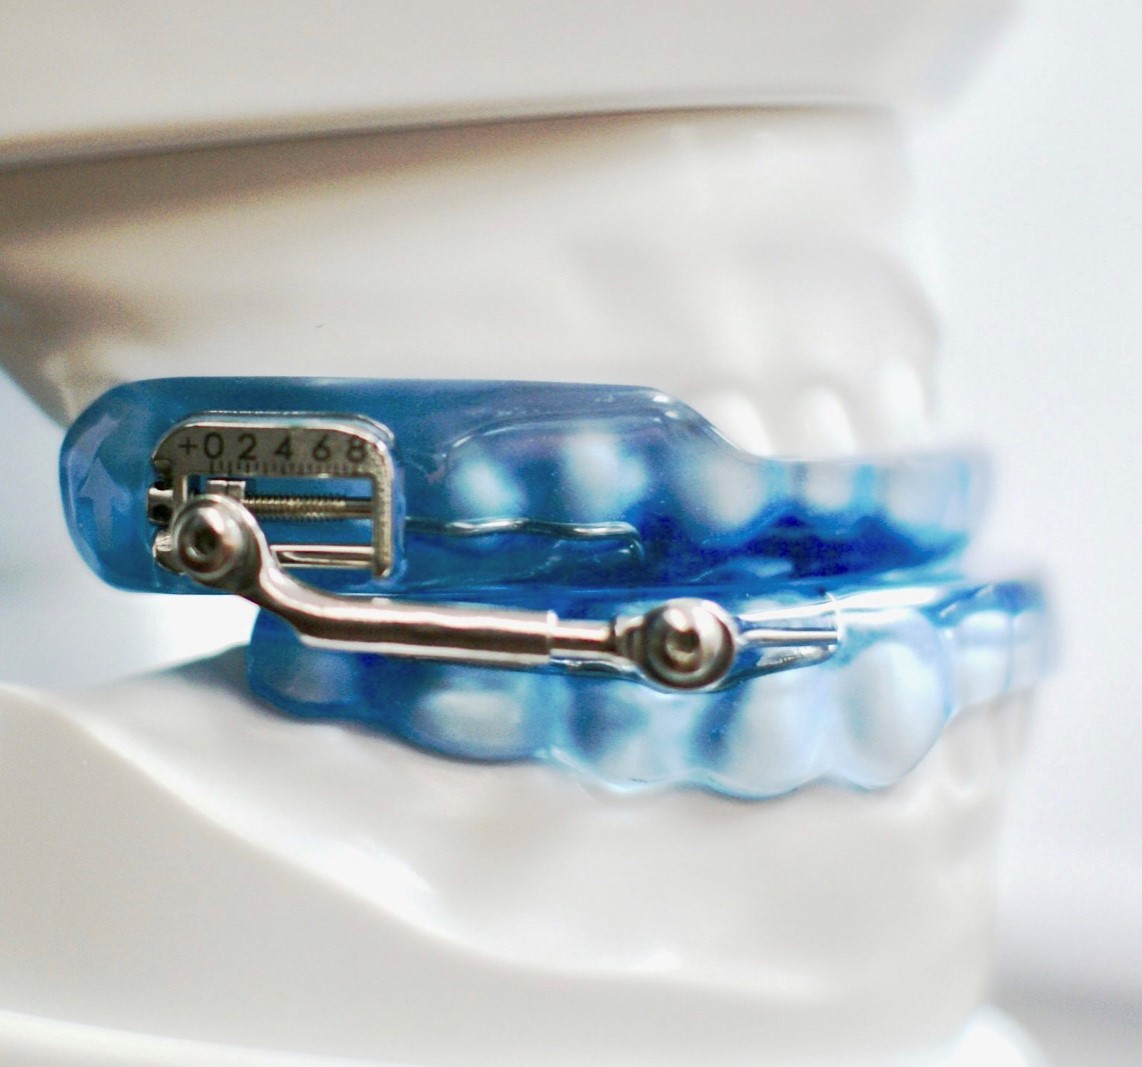 Dental Oral Appliance for CPAP